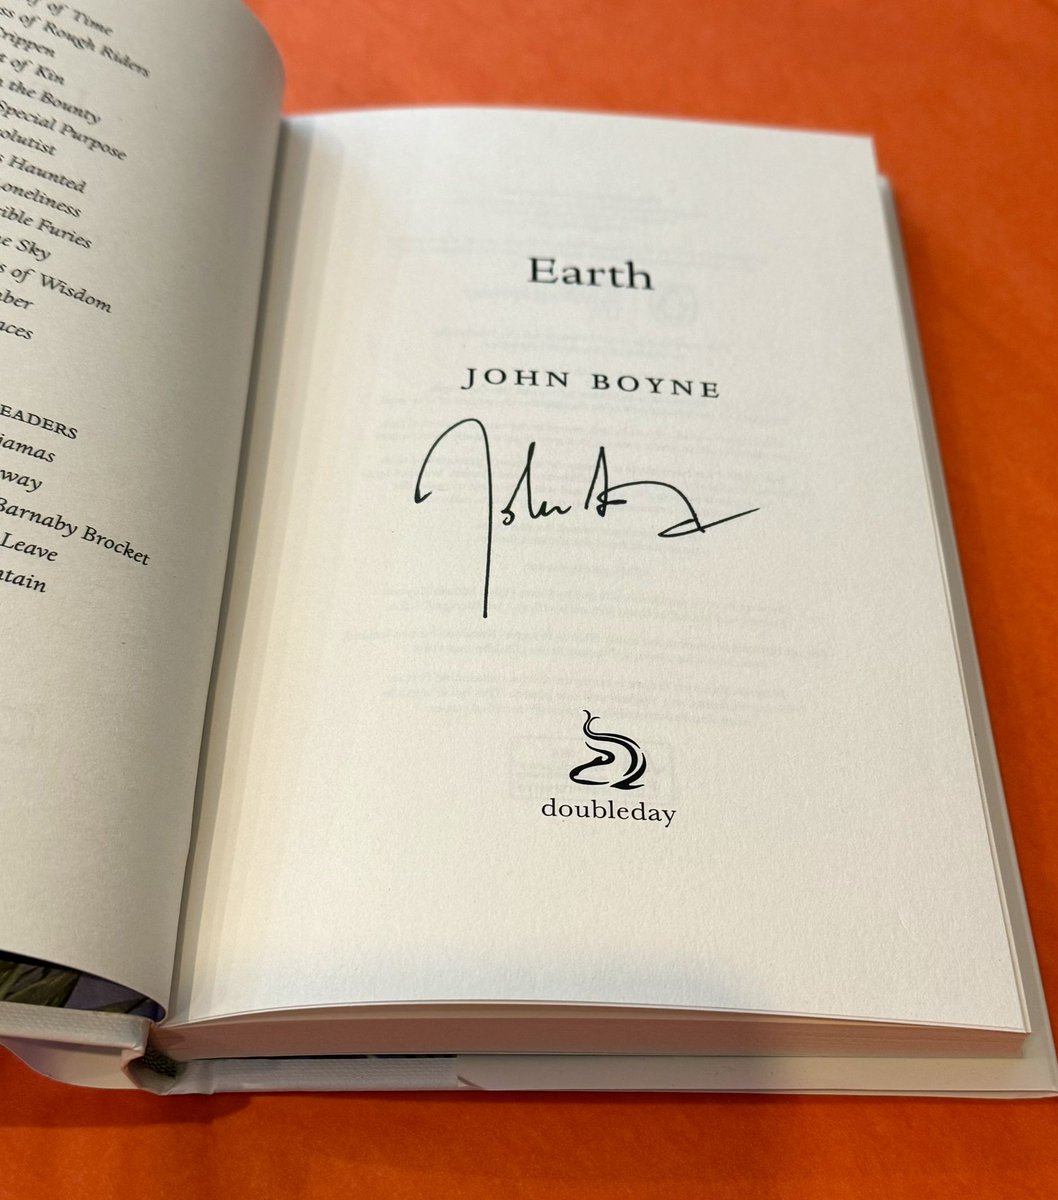 Our very last #signed copy of EARTH by @JohnBoyneBooks An inescapably gritty story about one young man whose direction in life takes a vastly different turn than what he expected foxlanebooks.co.uk/product-page/e…